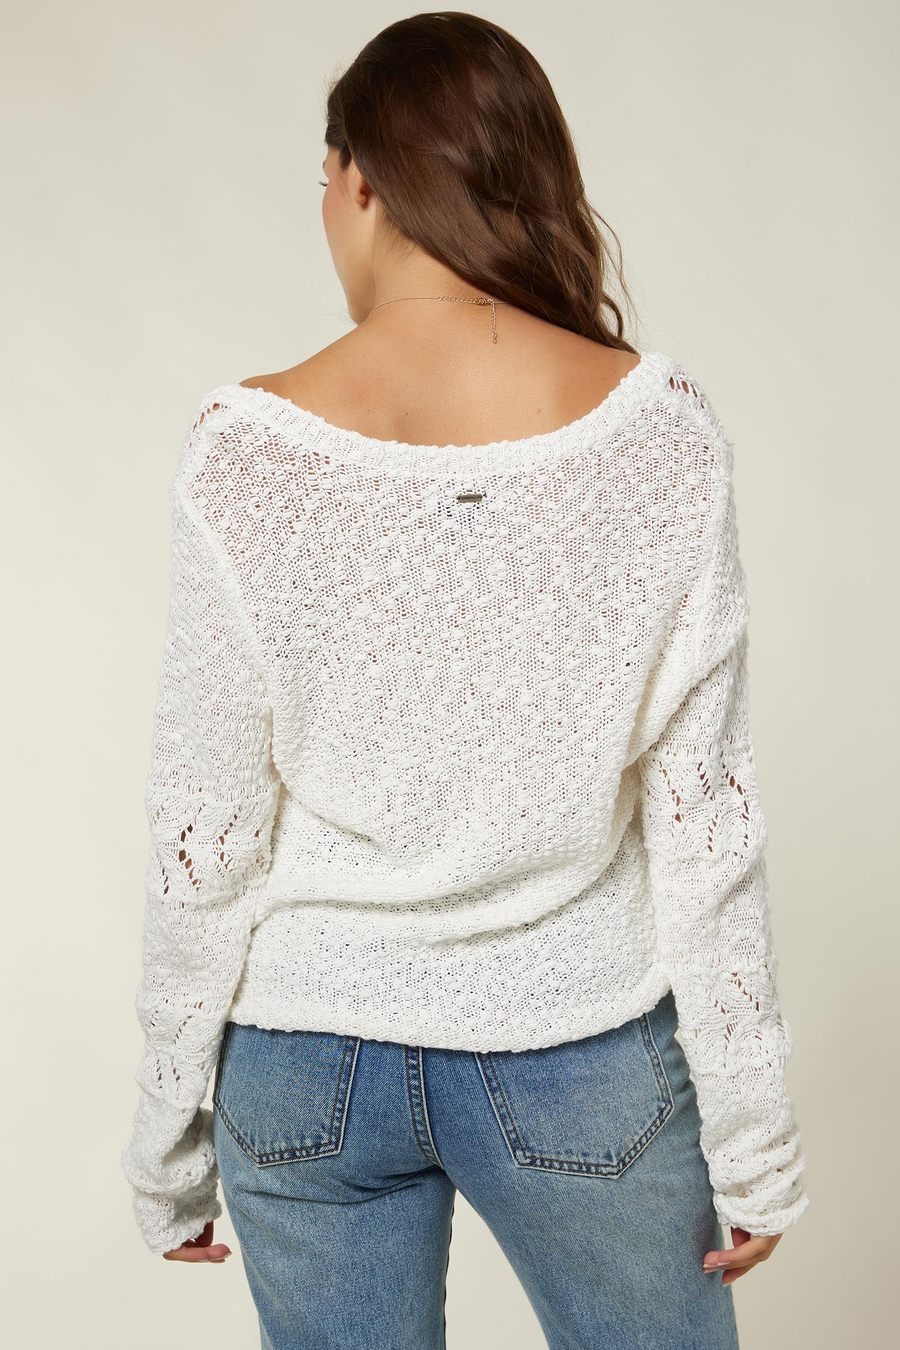 O'Neill Chelle Sweater